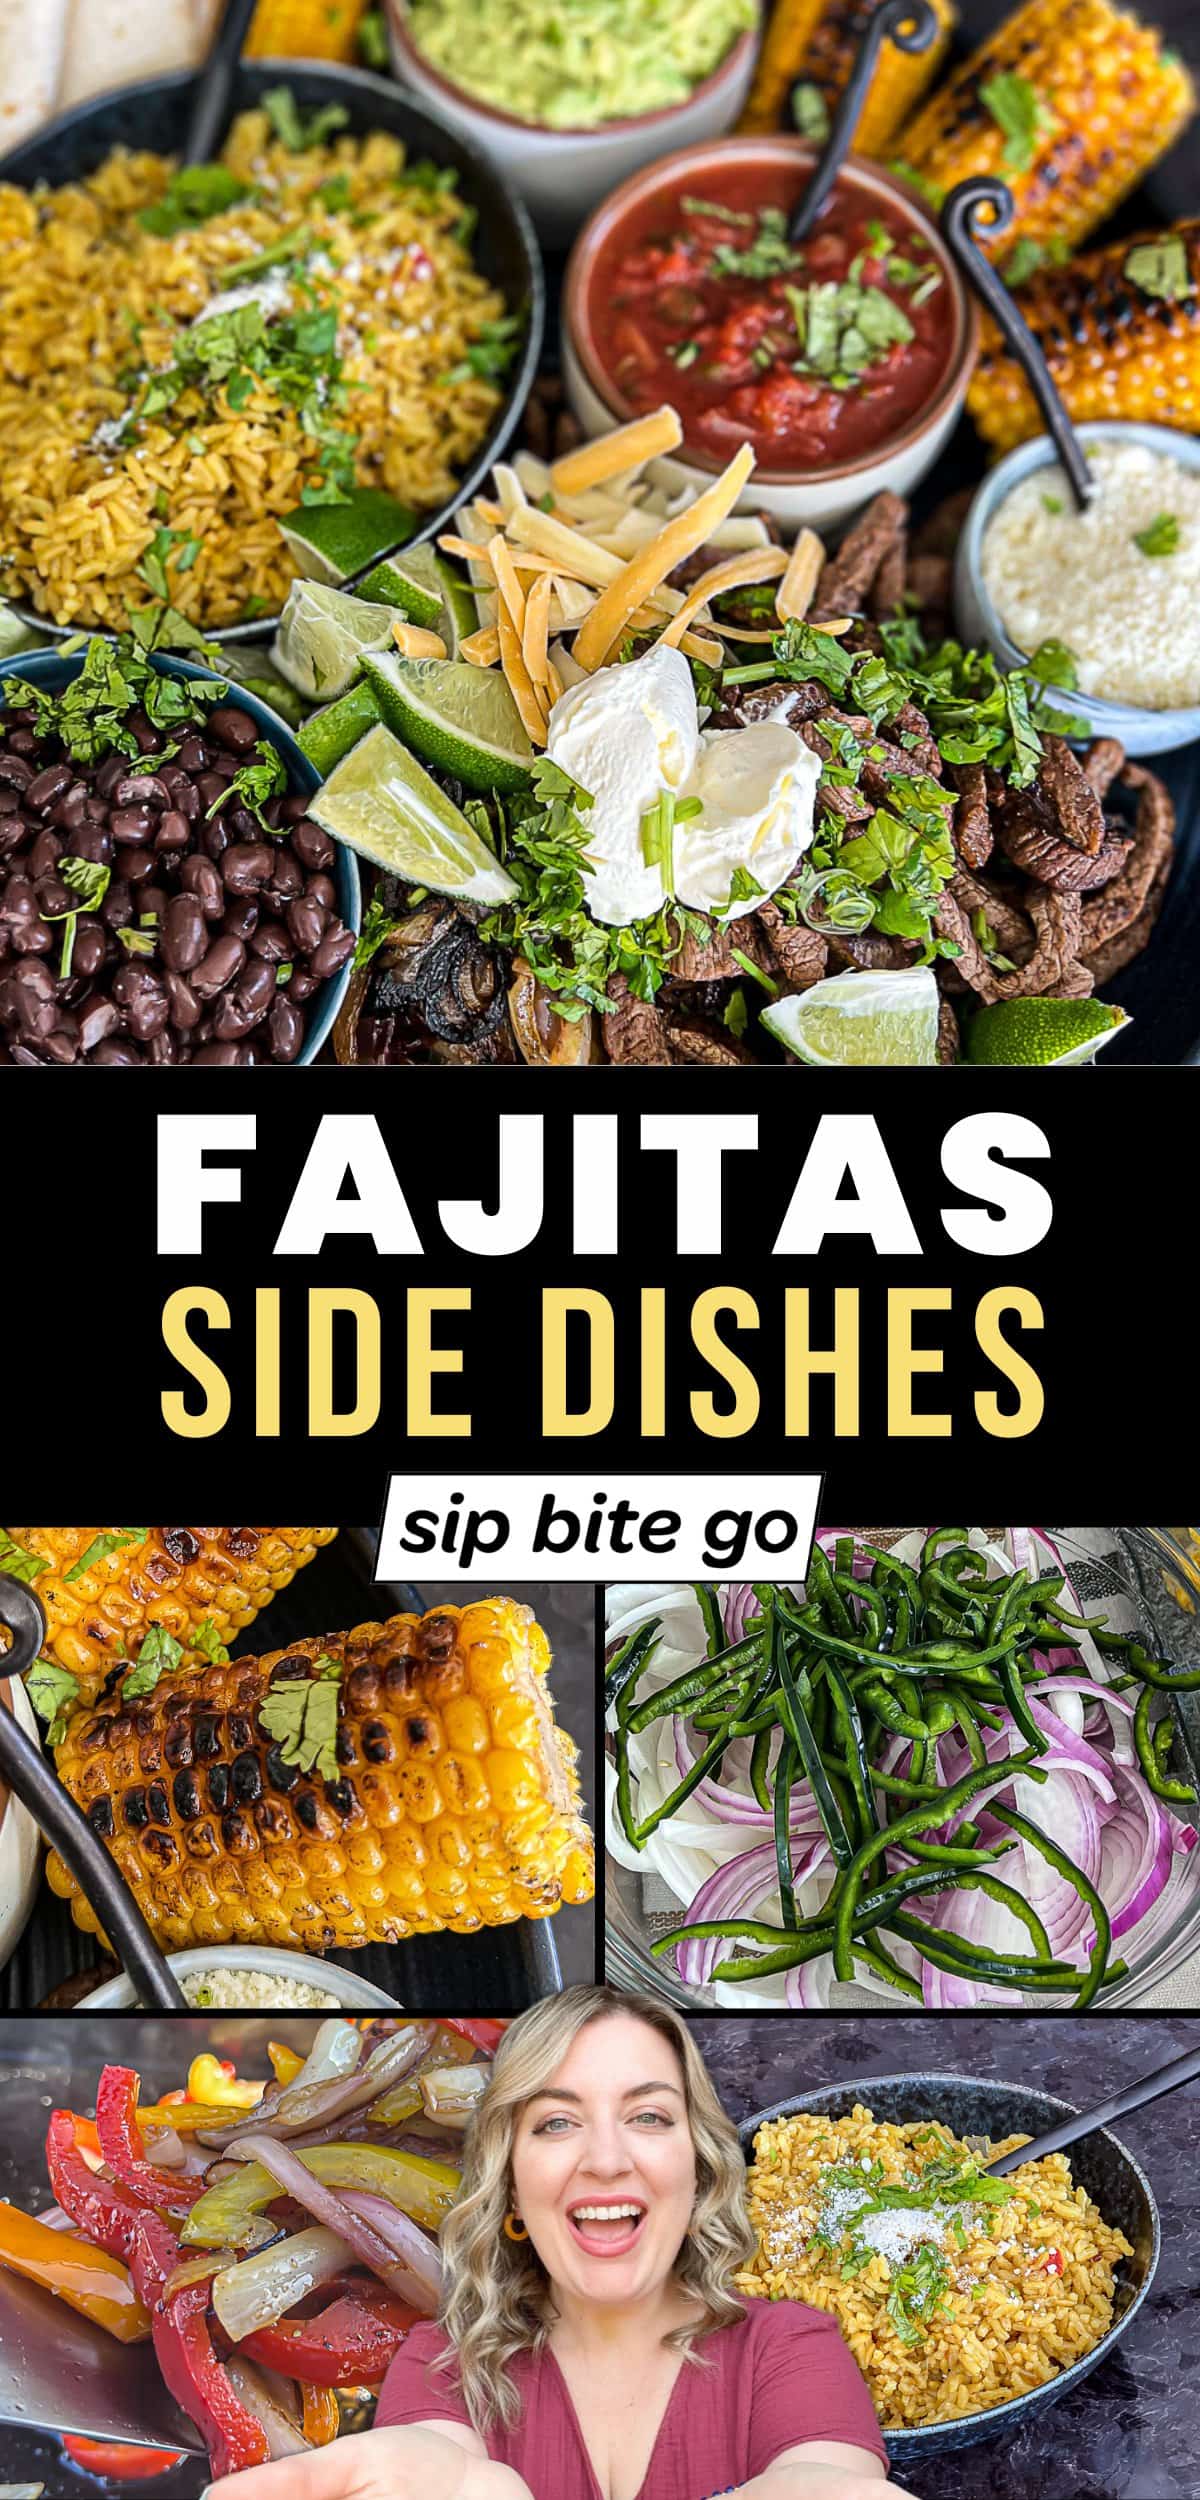 Images of fajitas side dish recipes with text overlay and Jenna Passaro and Sip Bite Go logo